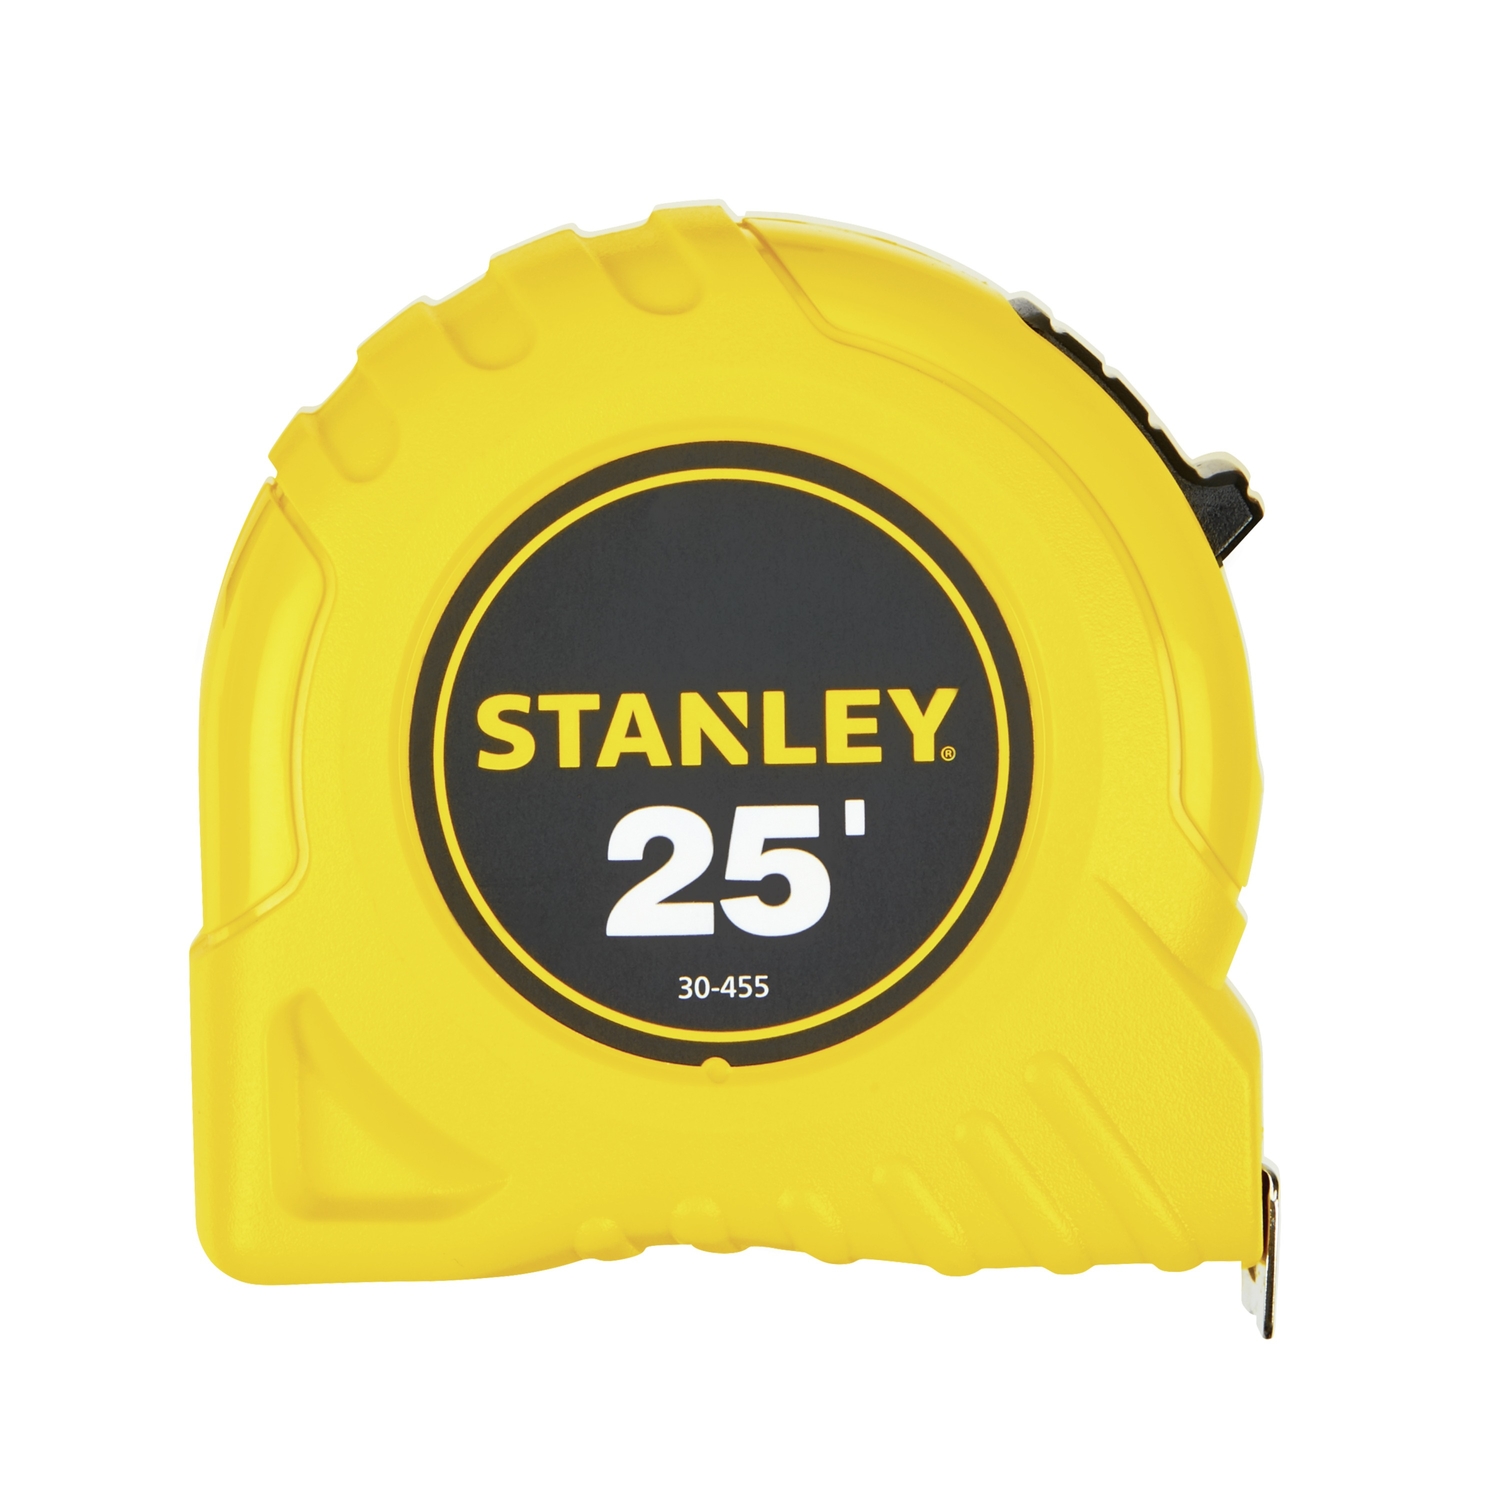 Photos - Tape Measure and Surveyor Tape Stanley 25 ft. L X 1 in. W Tape Measure 1 pk 30-455 